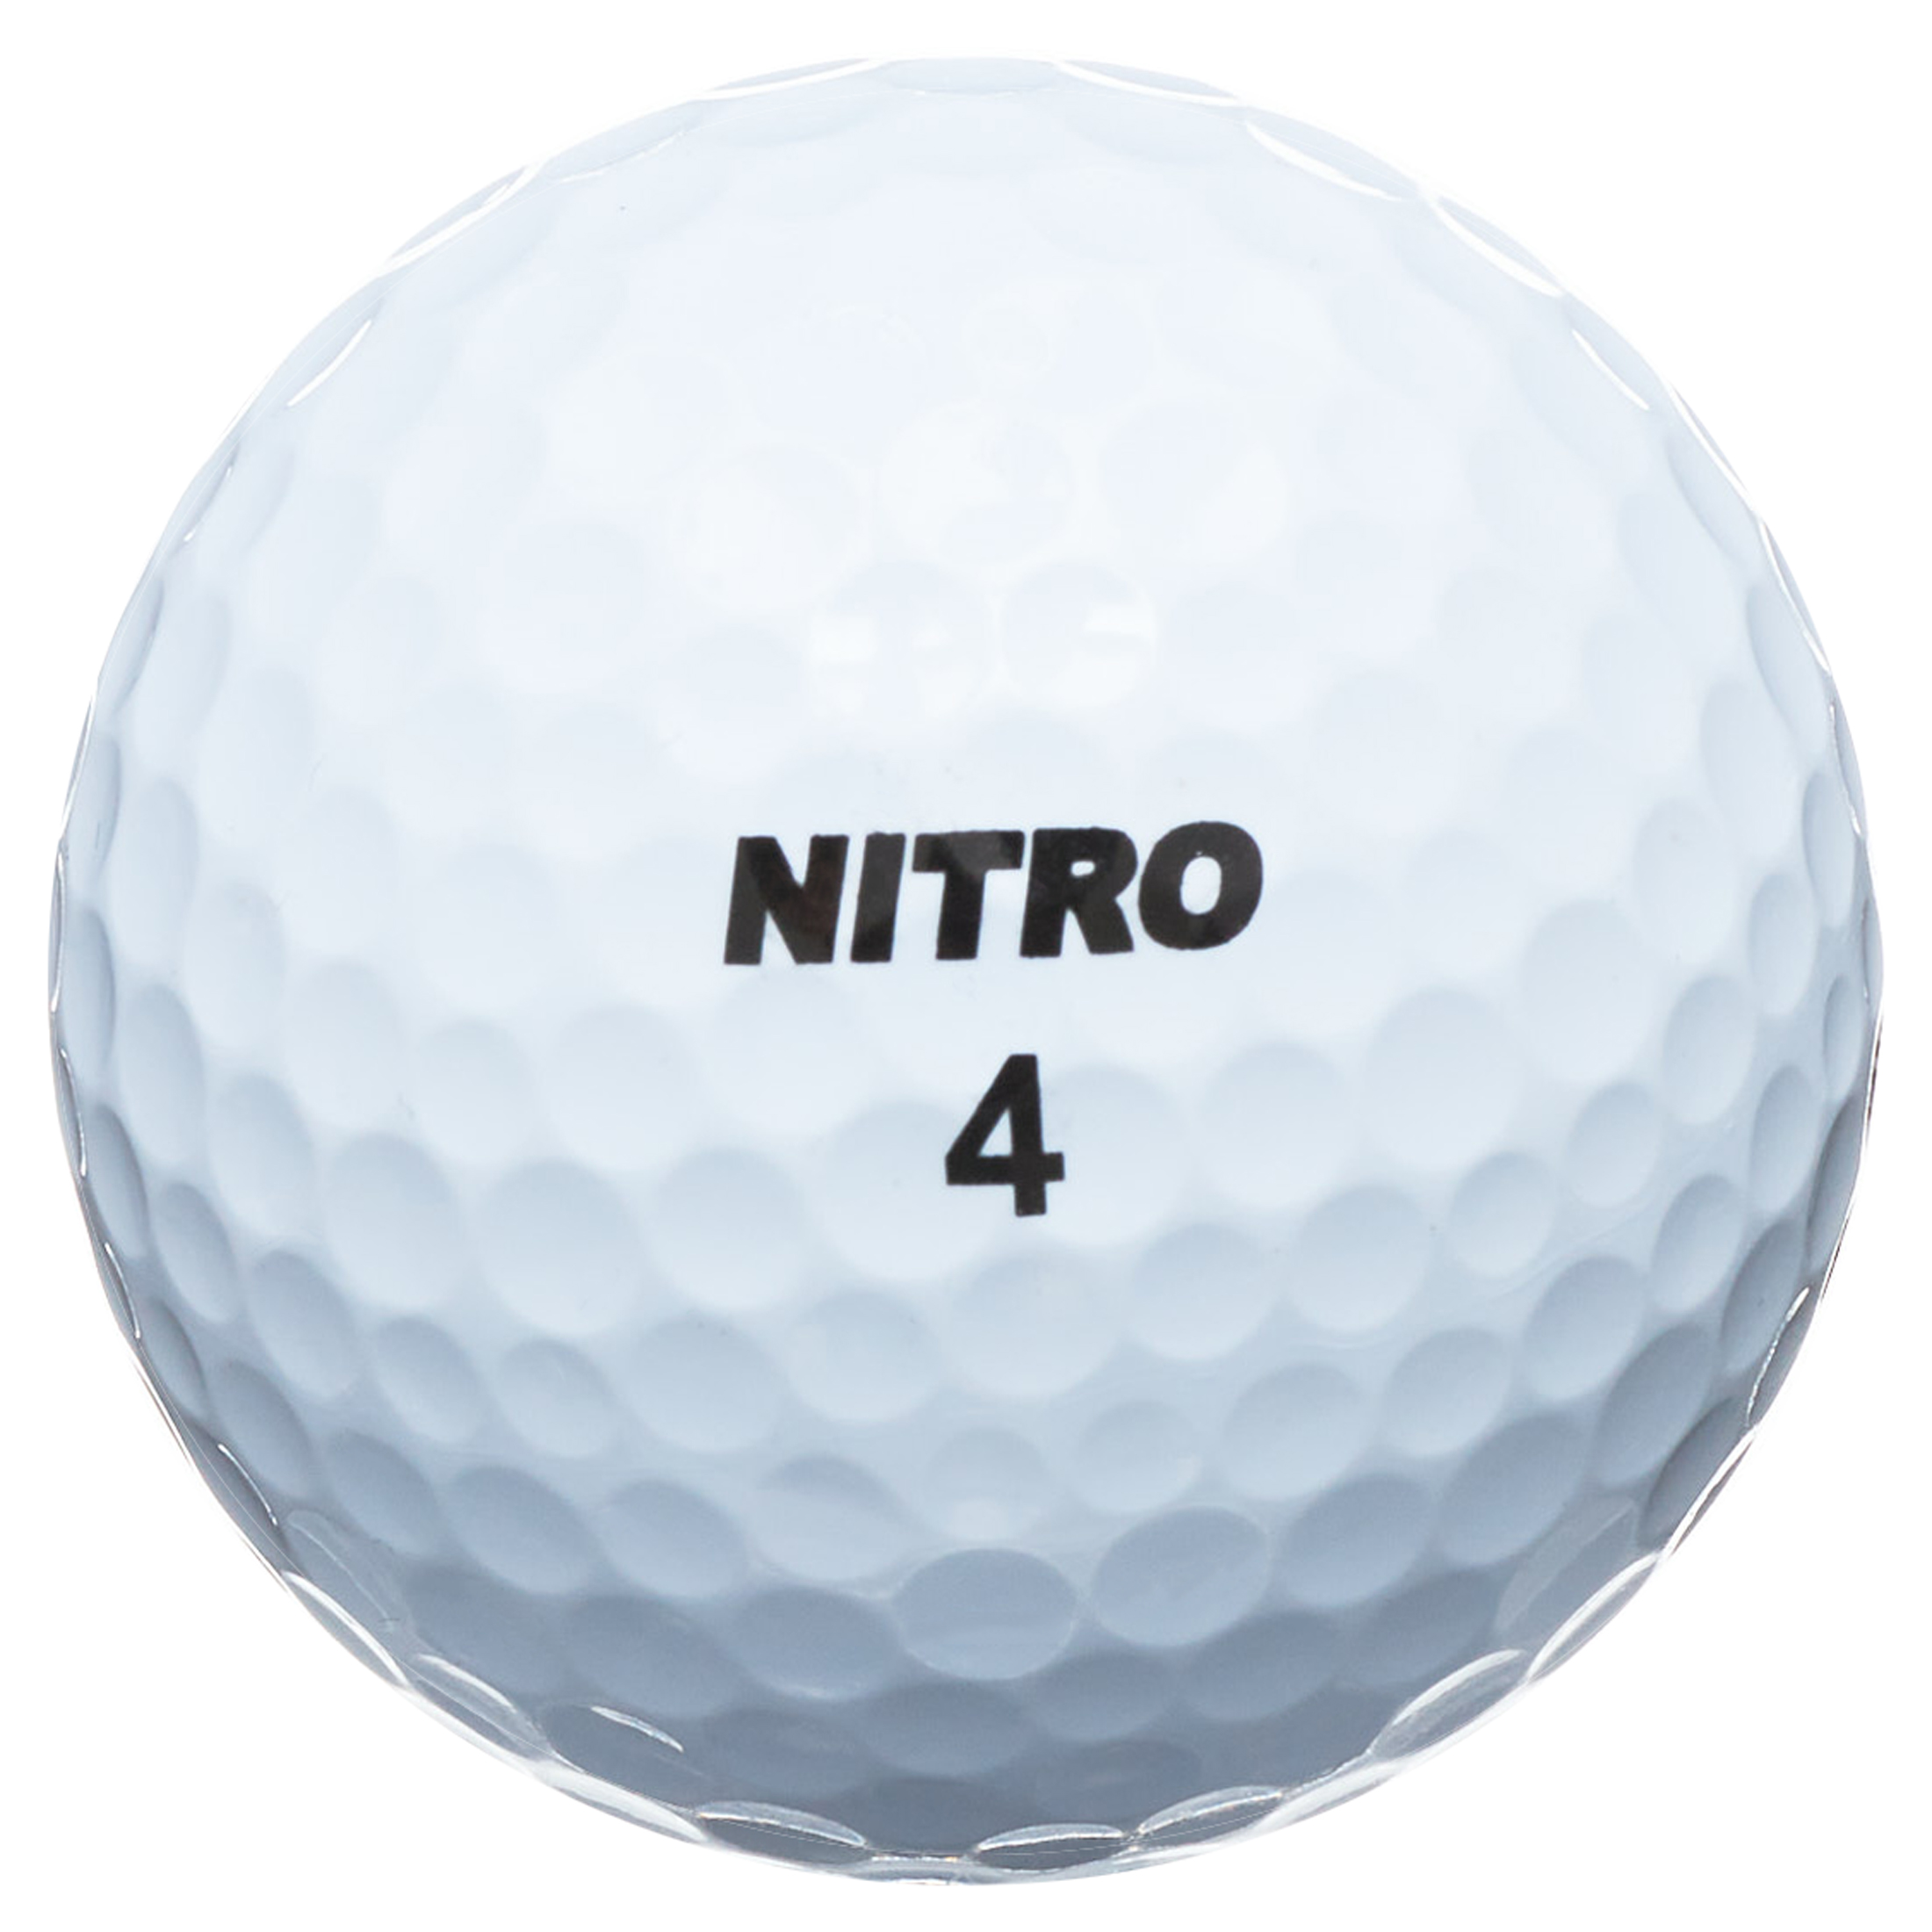 Nitro Golf Ultimate Distance Golf Balls, 12 Pack - image 3 of 4